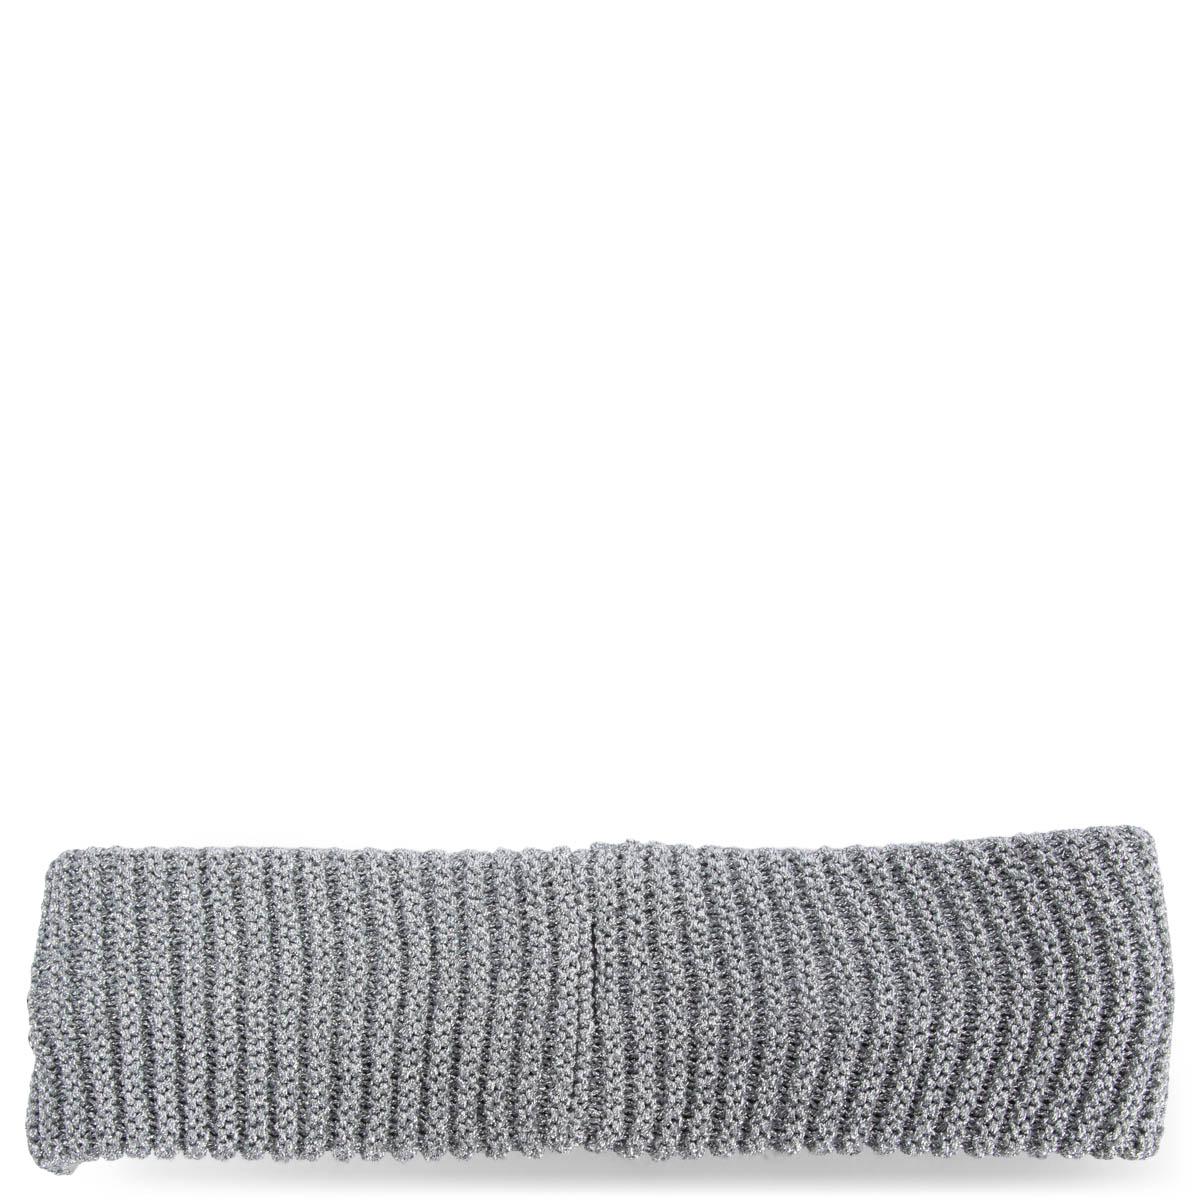 100% authentic Chanel 2017 fall/winter chainmail headband in light gray and silver wool (33%), polyamide (30%), polyester (22%), angora (14%) and elastane (1%). Embellished with faux and sweet water pearls (perle d'eau douce), rhinestones, glass and